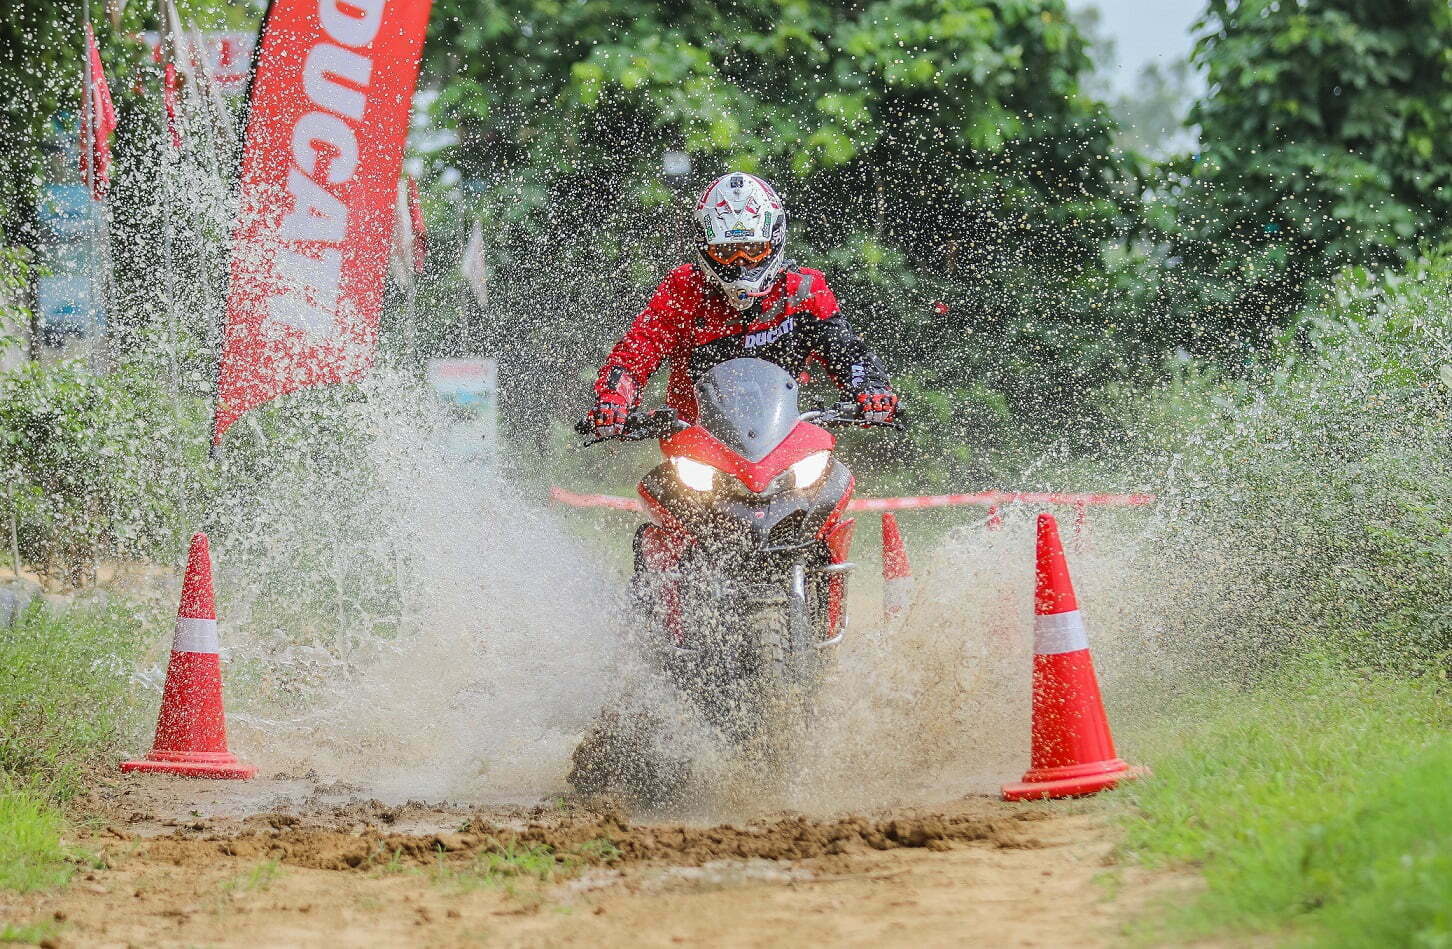 Ducati Riding Experience on dirt (5)